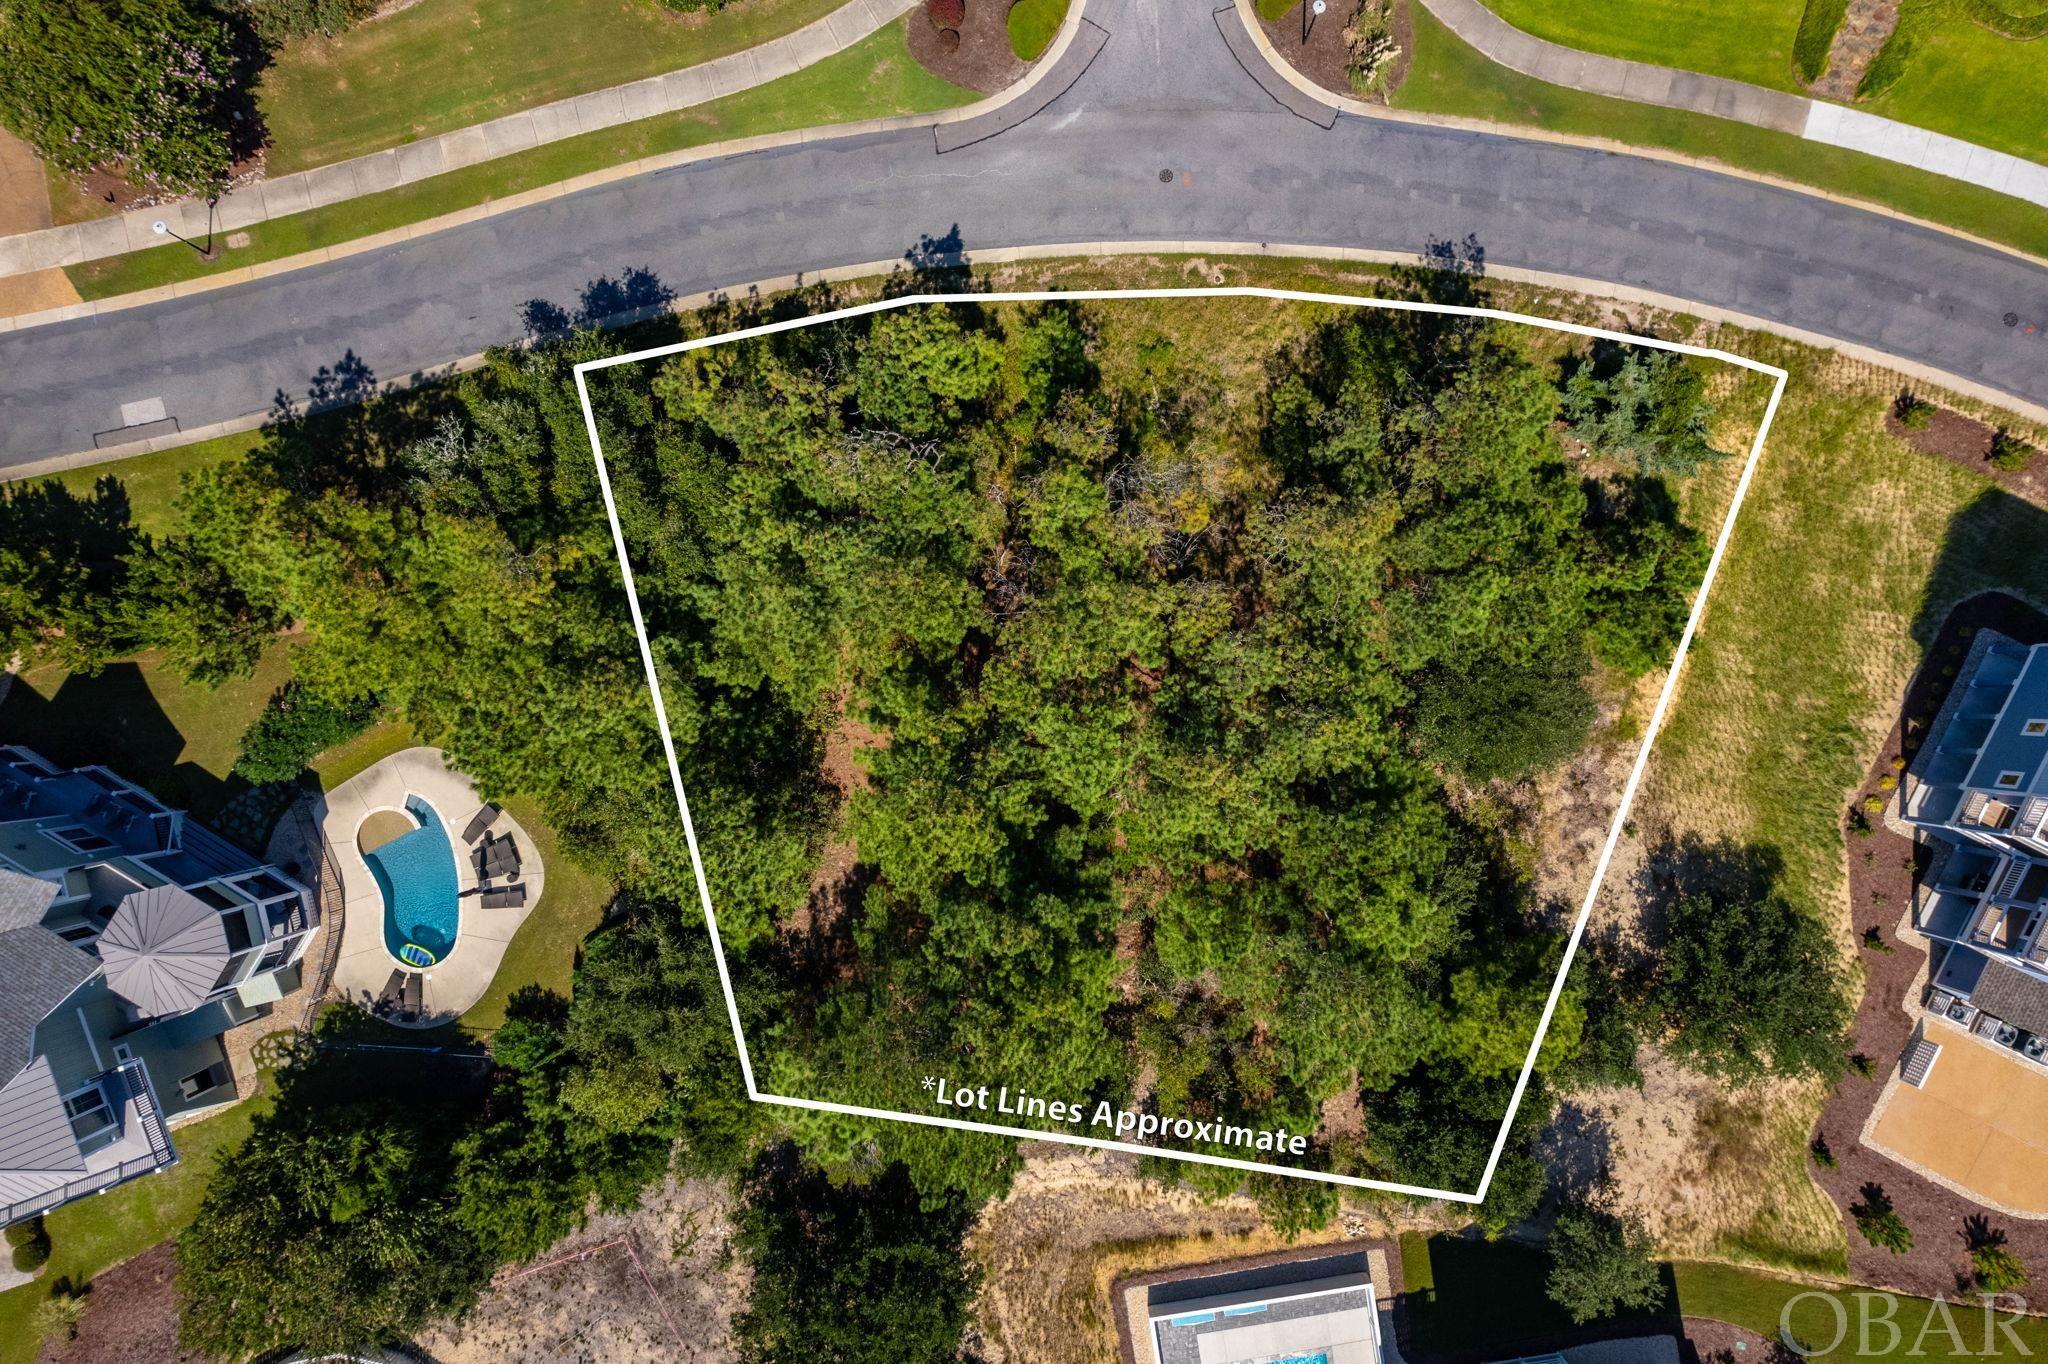 Great Location! Premiere Lot in the Currituck Club, 17,532 sq.ft. to build your home in paradise. Capture this opportunity with very few lots remaining. Drive by and see how amazingly easy it will be to clear and build. Flood zone X. So No worries.  Call Mary with any questions, 301-785-1601